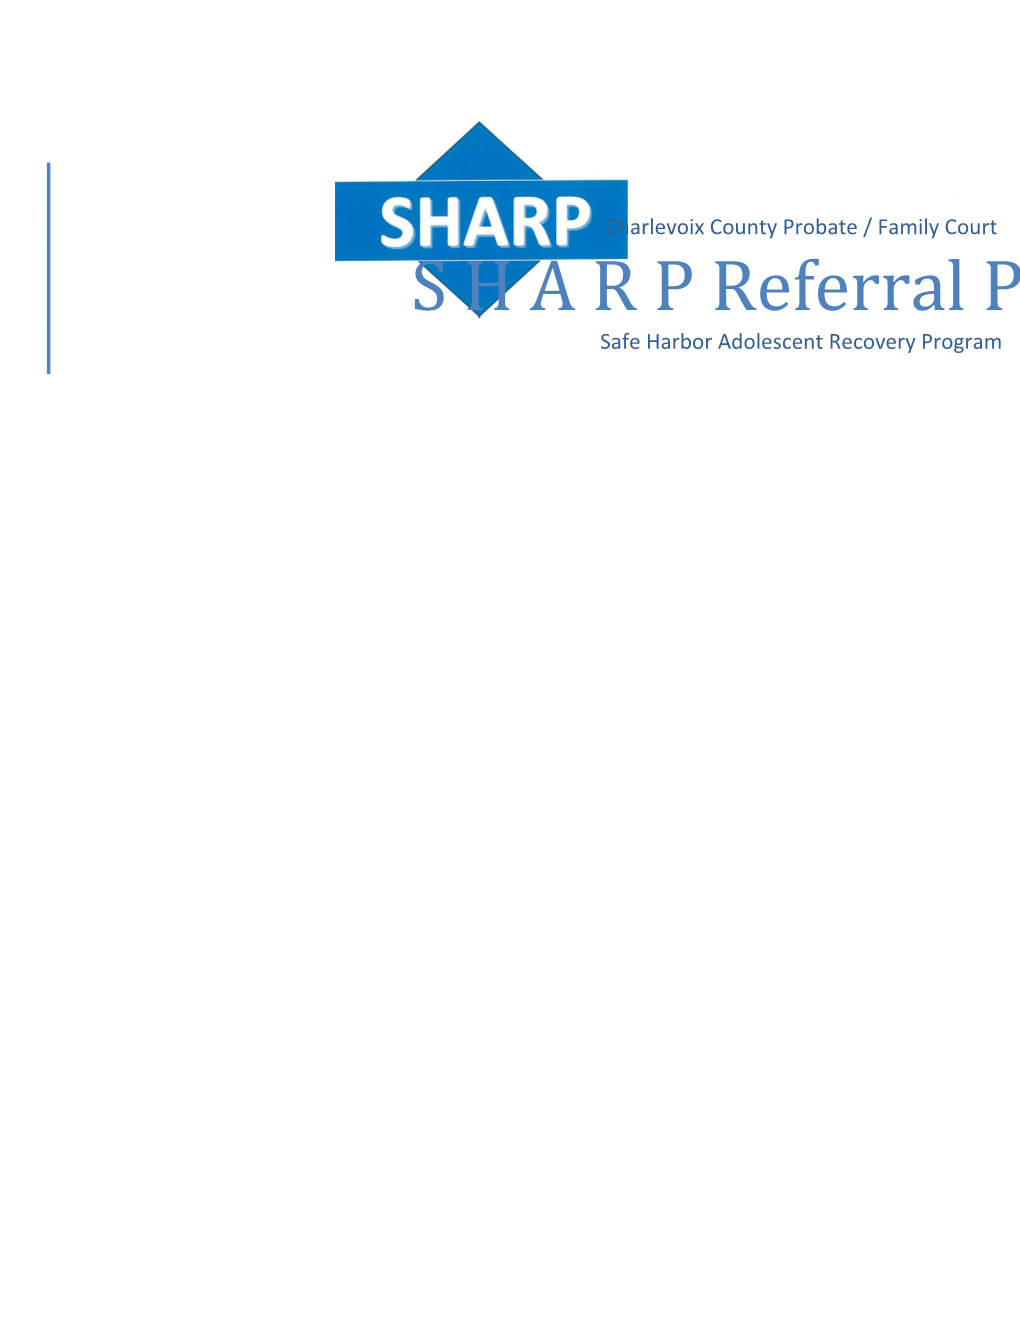 Instructions for Completing S H a R P Referral Form